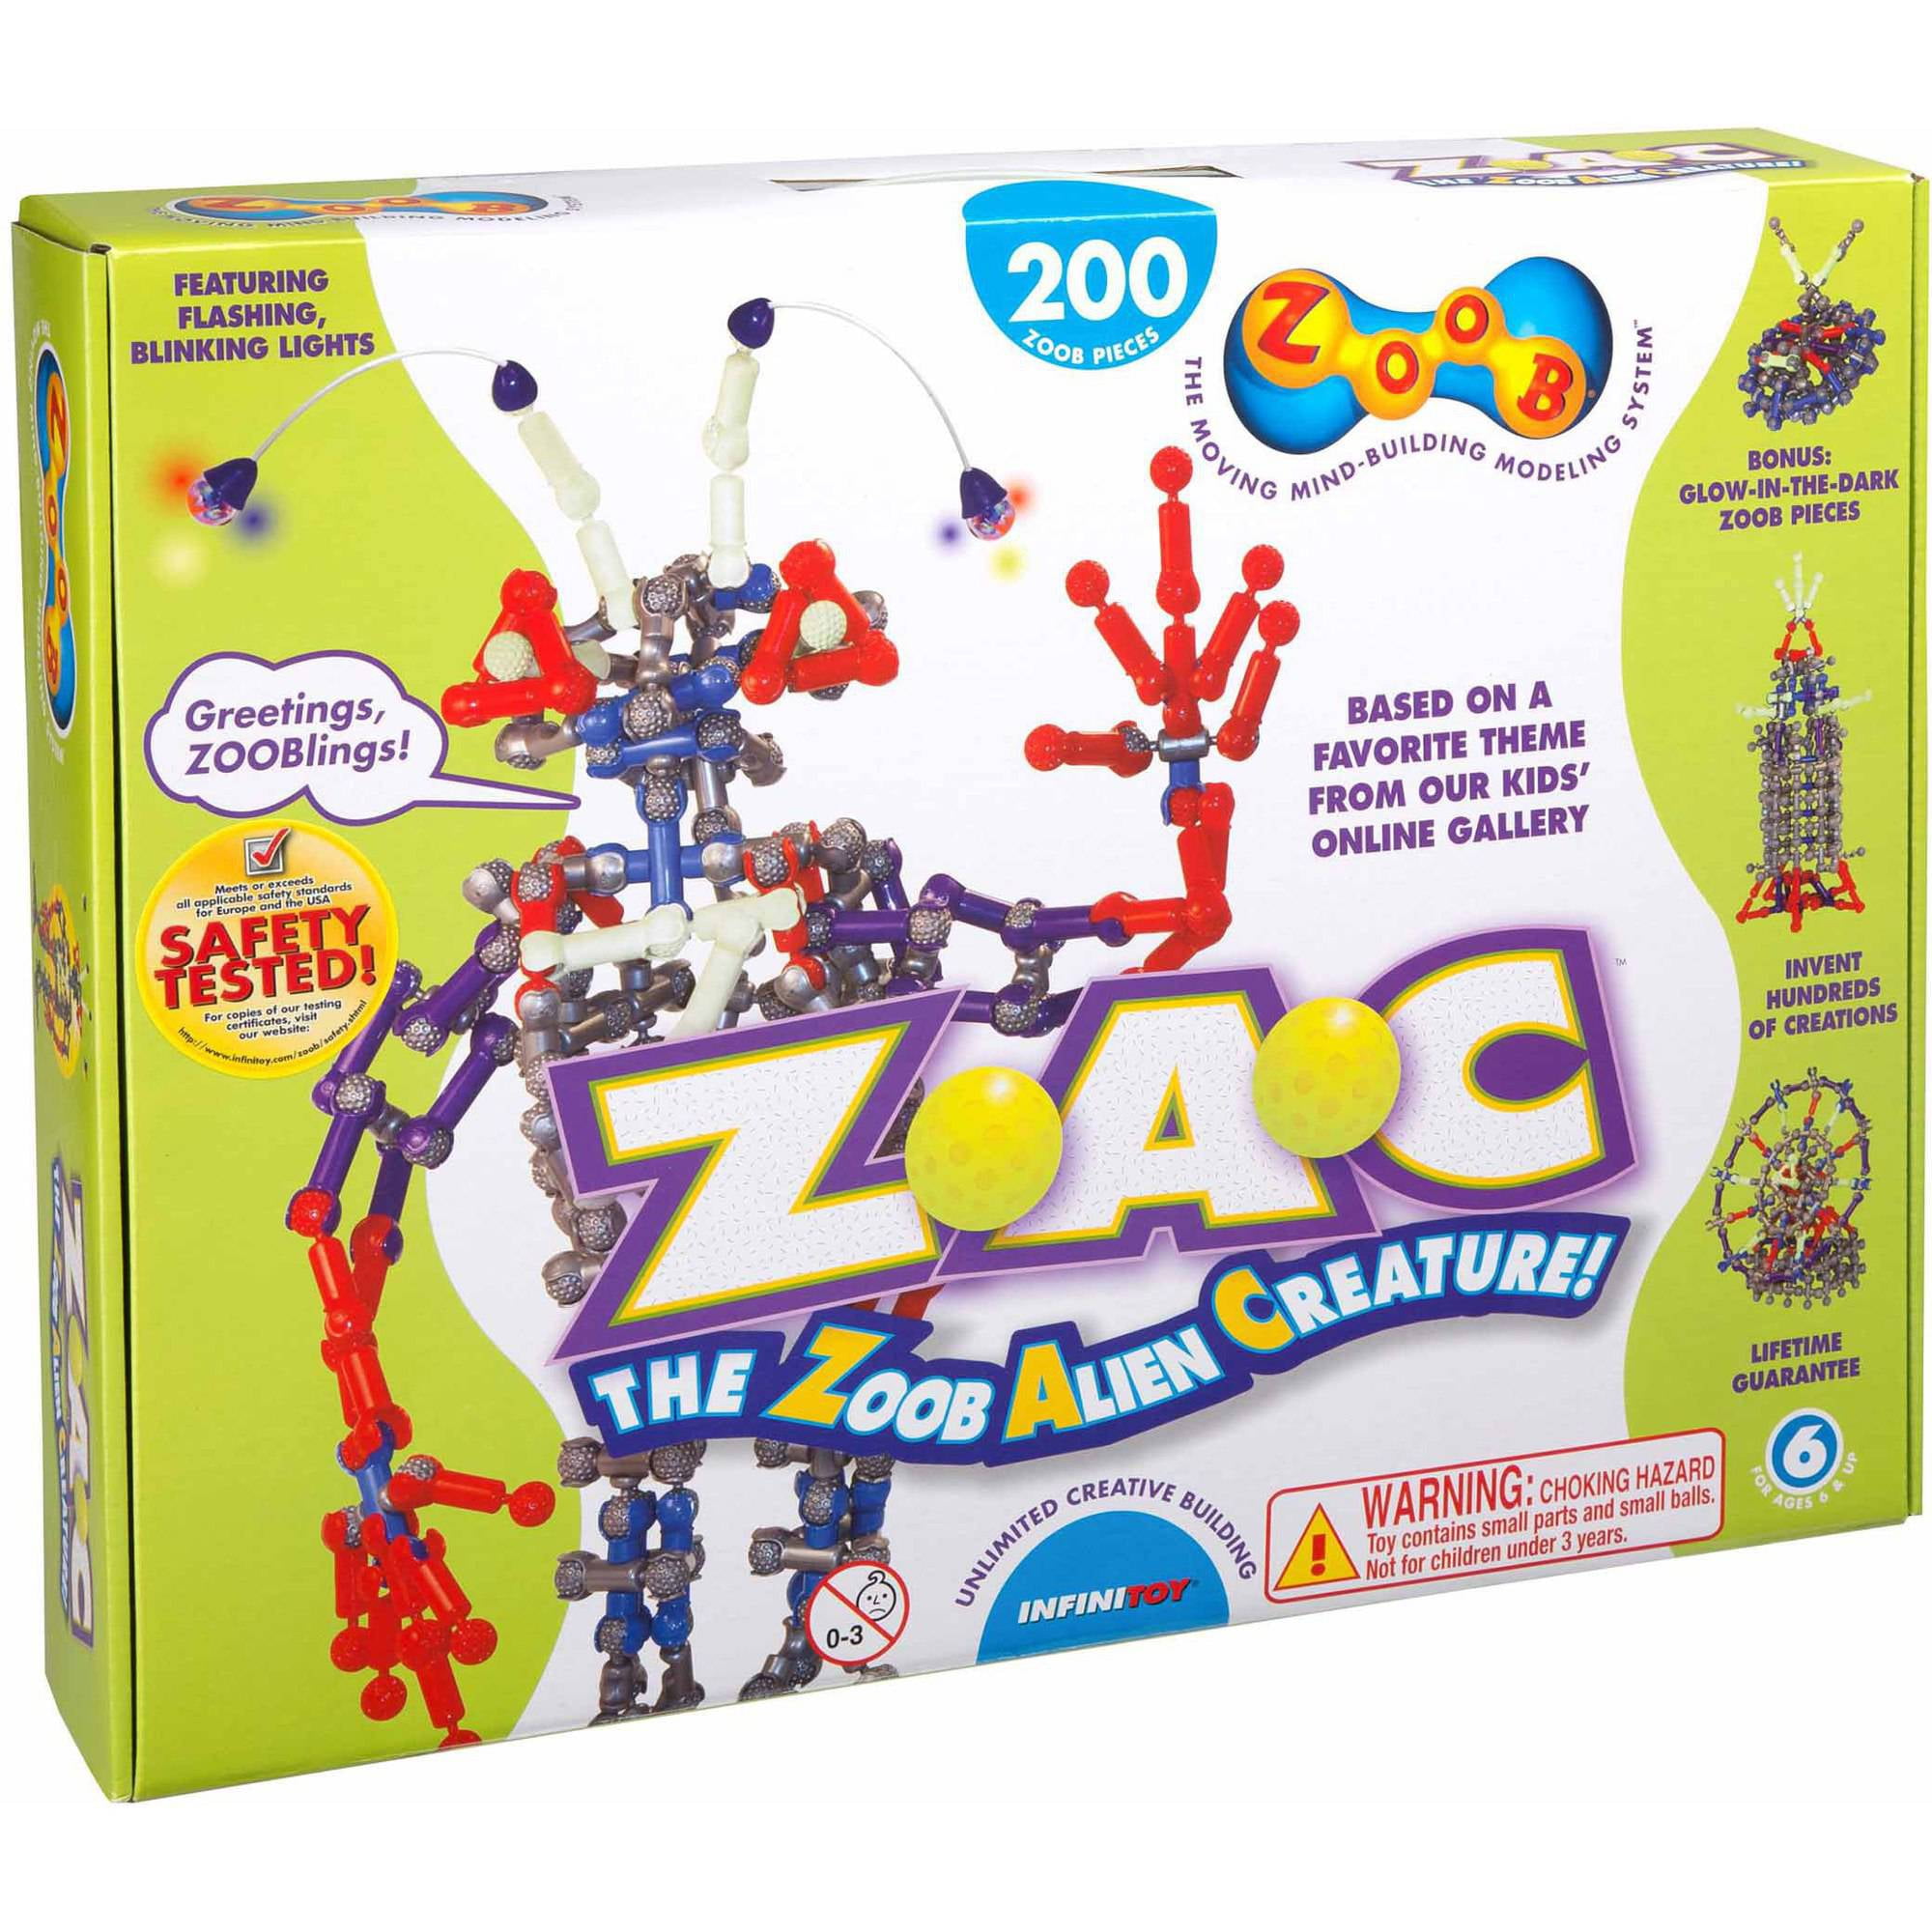 ZOOB Galax-Z Z-Star Explorer SciFi DIY Construction Kit with Movable Joints 